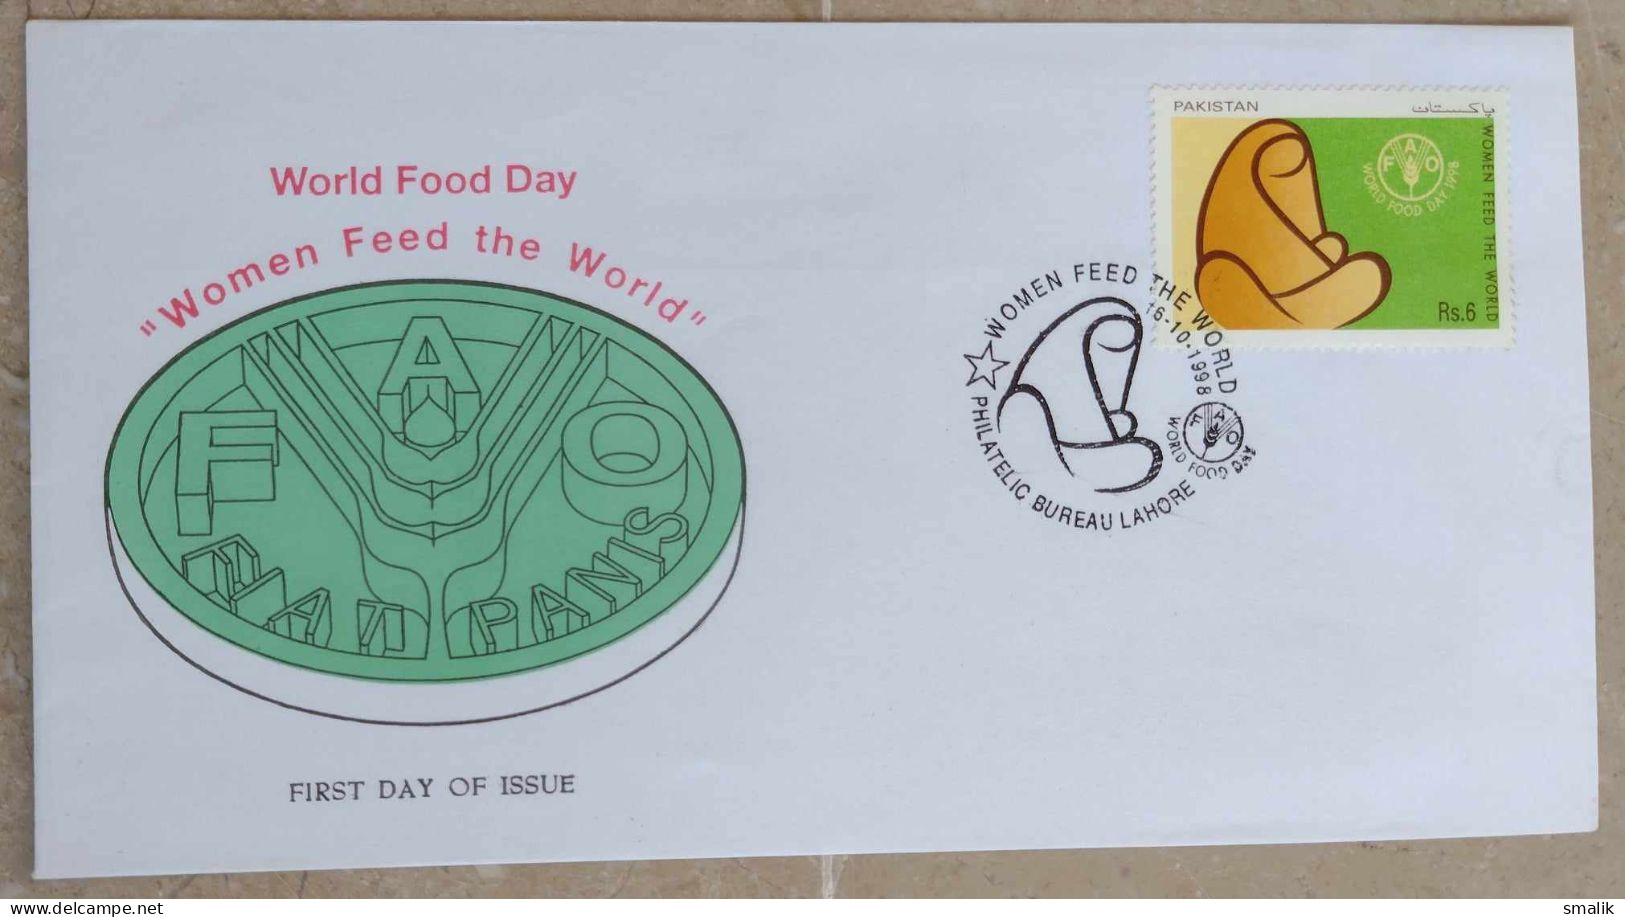 PAKISTAN 1998 FDC - FAO World FOOD Day, Women Feed The World, First Day Cover - Pakistán